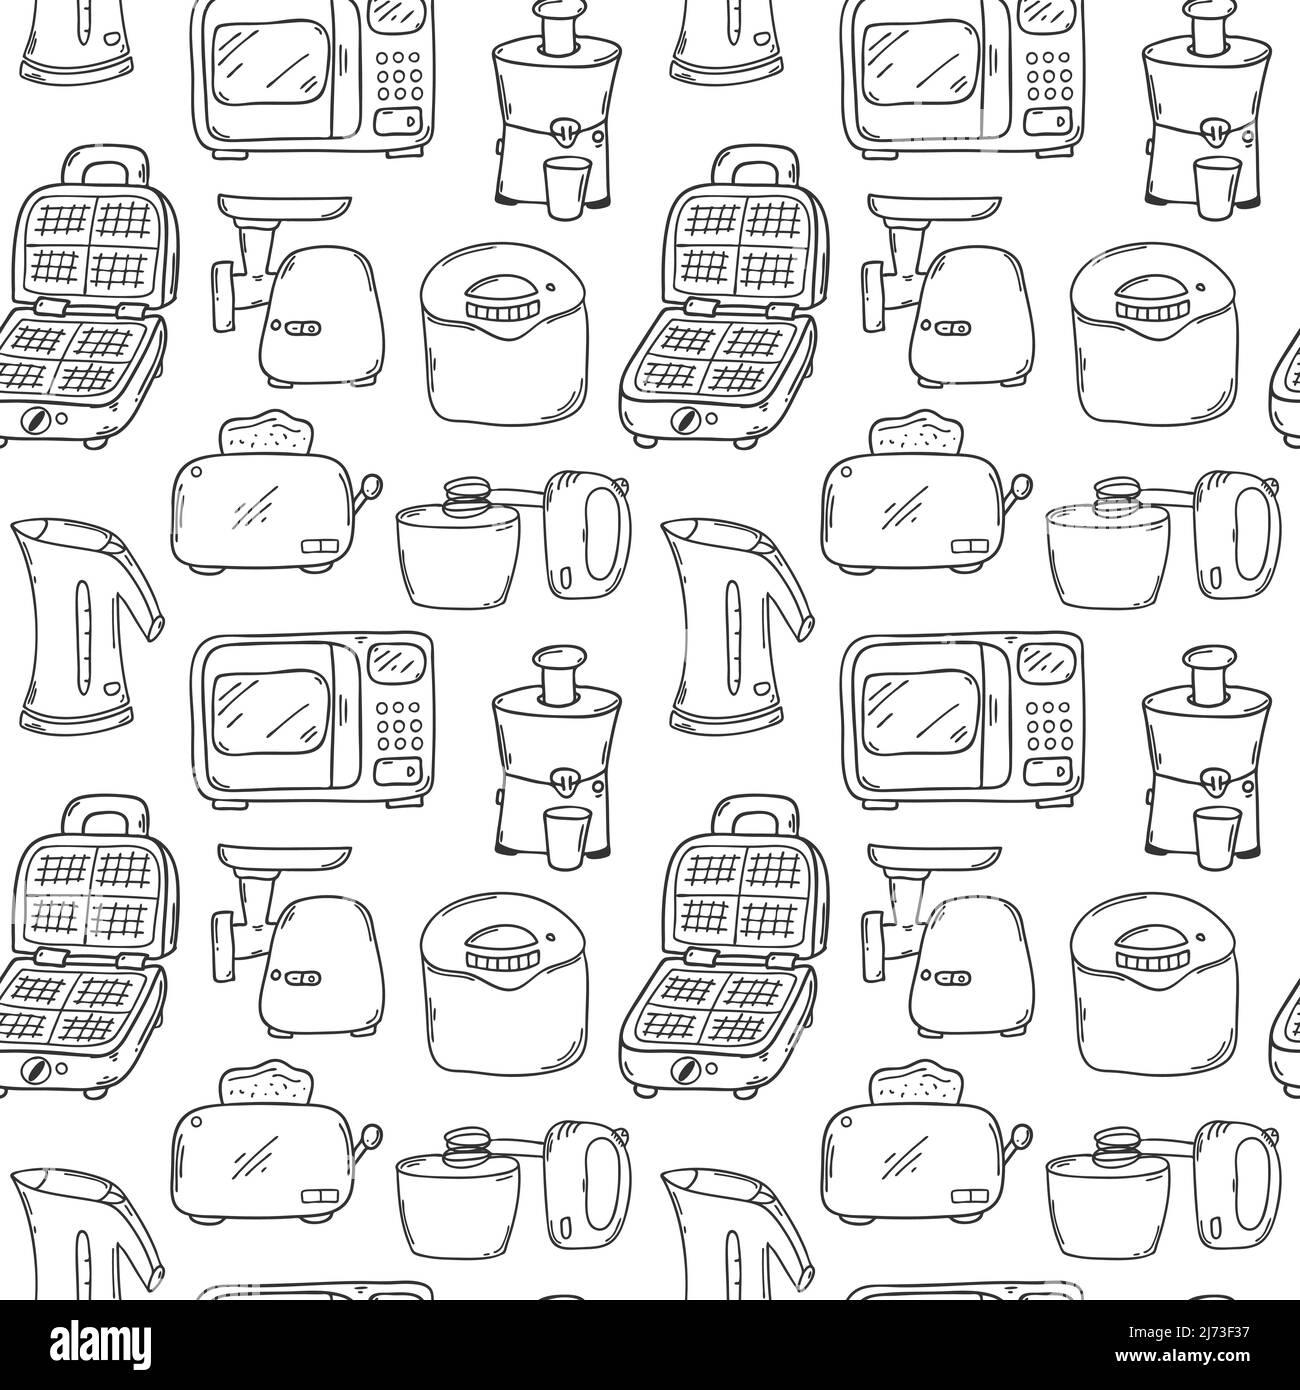 Seamless pattern with kitchen appliances. Microwave, kettle, toaster, steamer, waffle iron, mixer. Monochrome backdrop with simple hand-drawn Outline Stock Vector